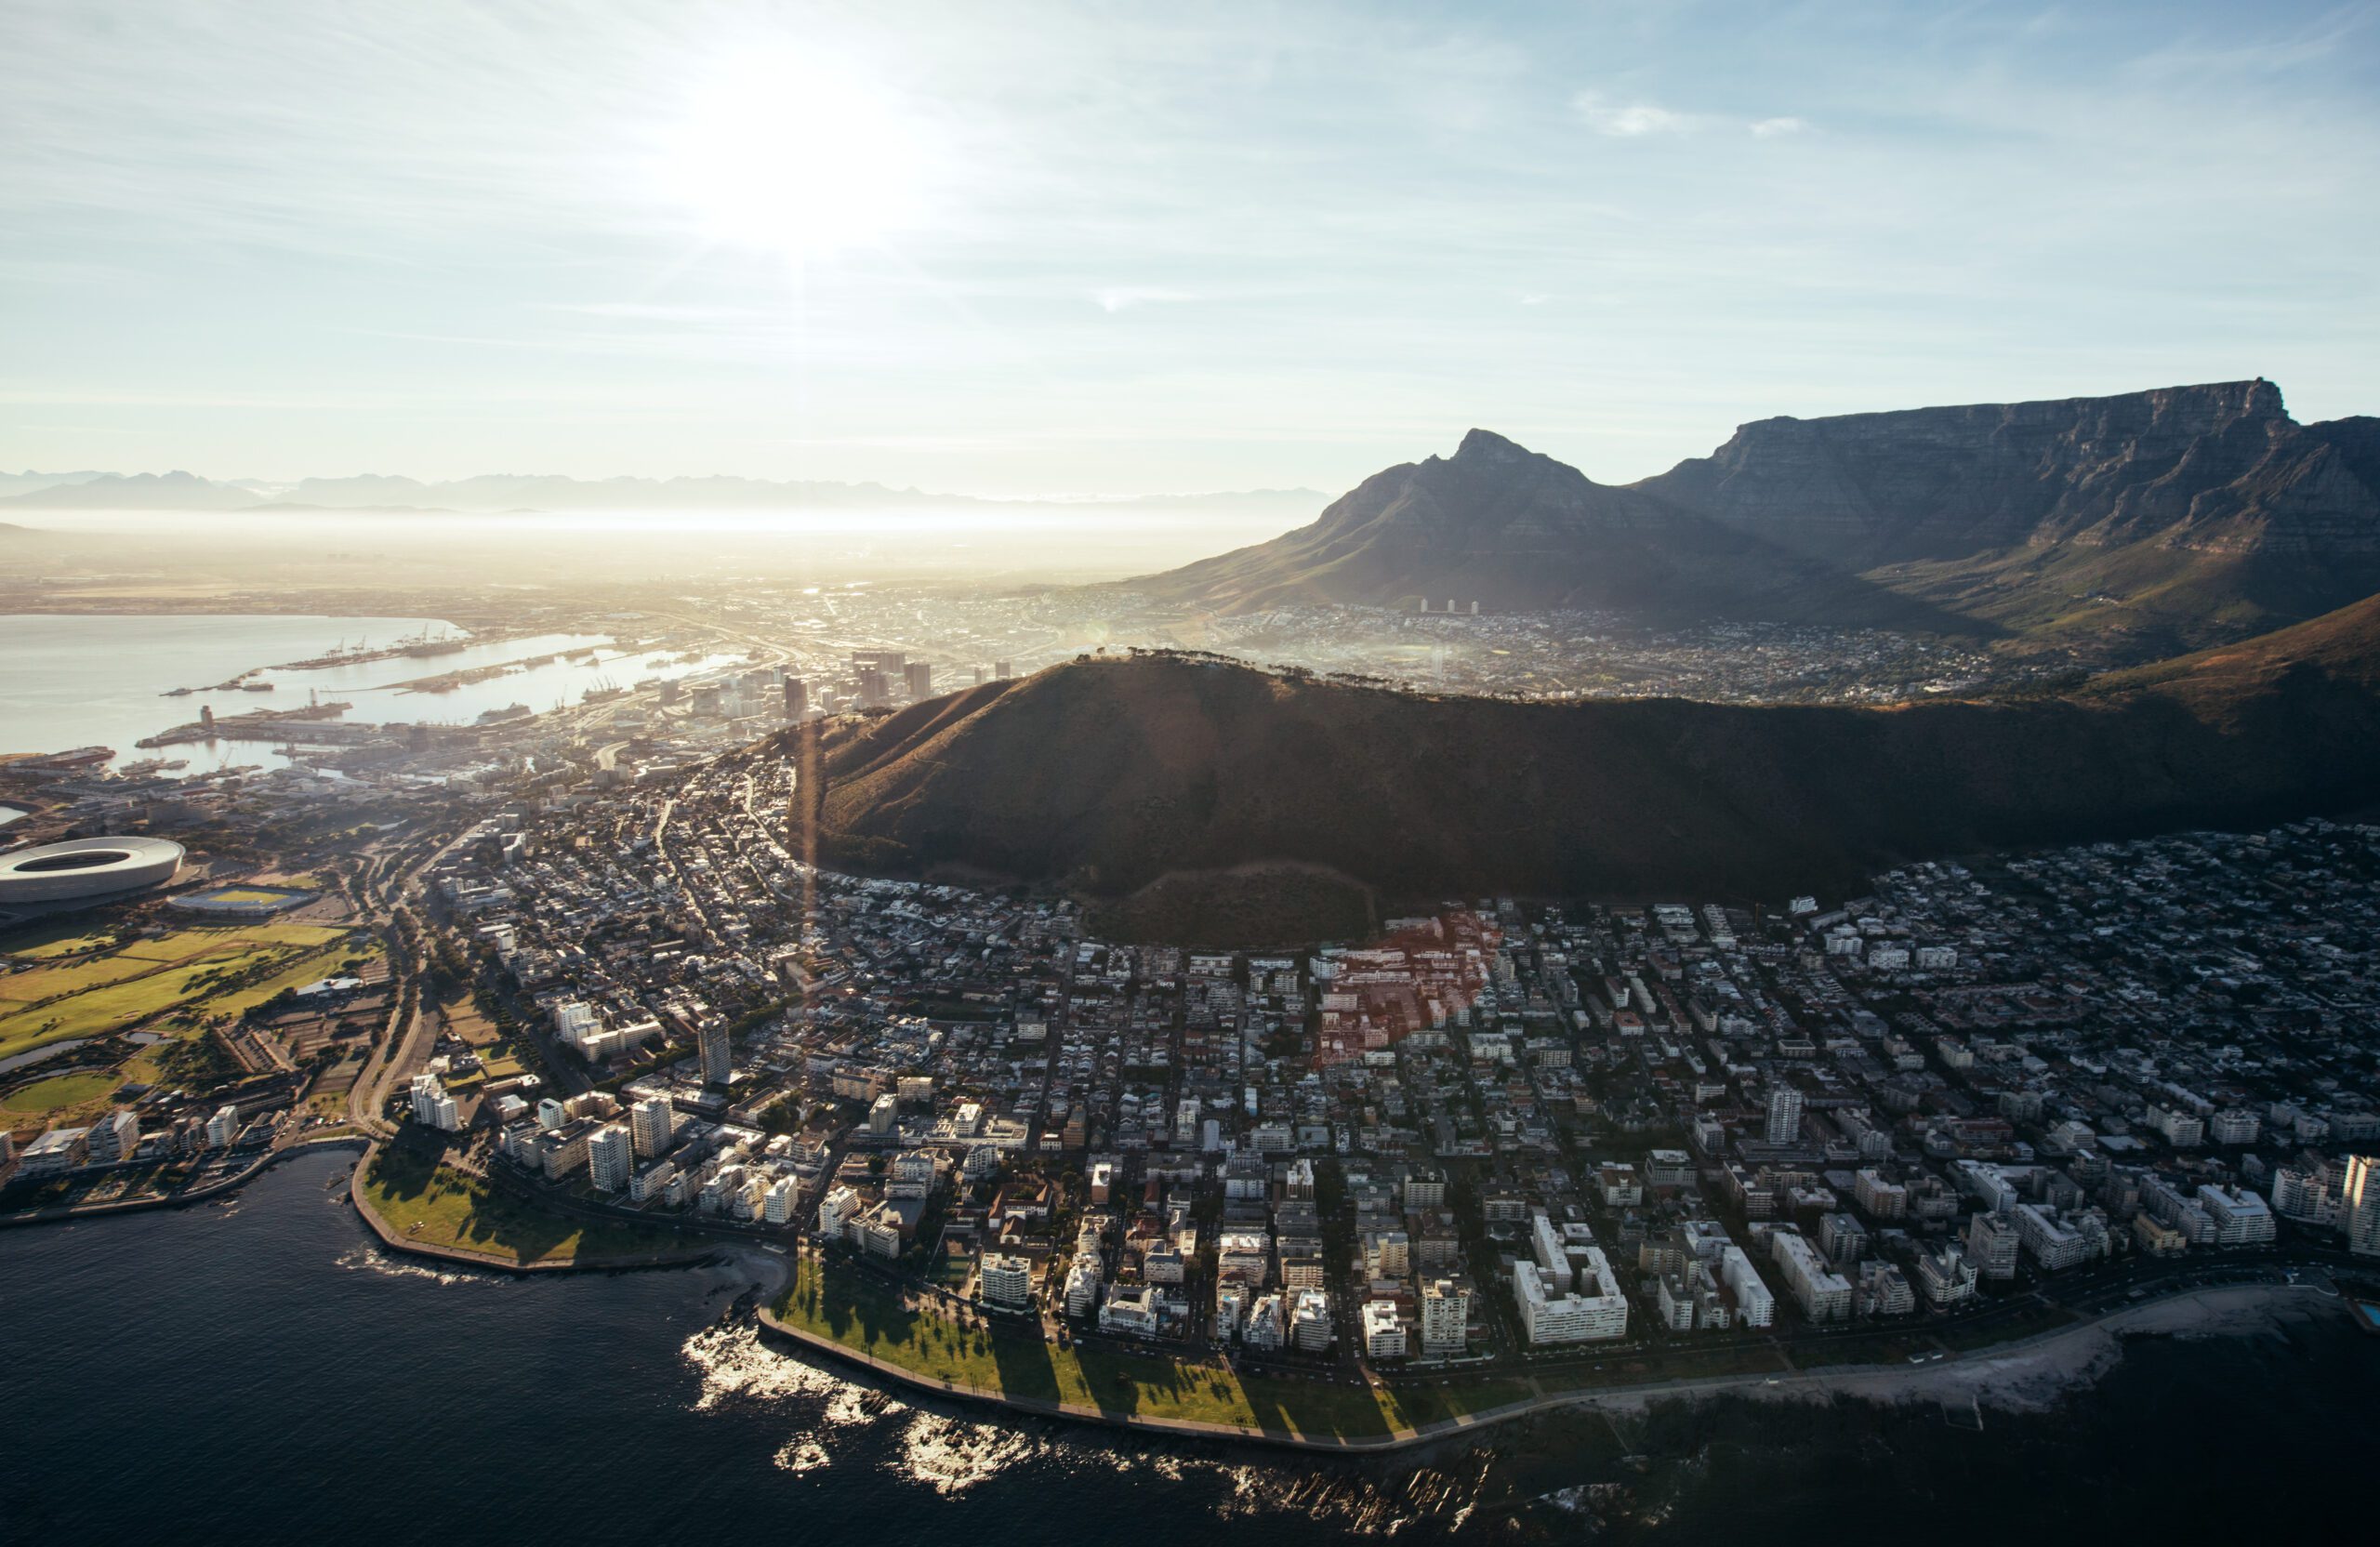 Birds eye view of city of cape town with buildings